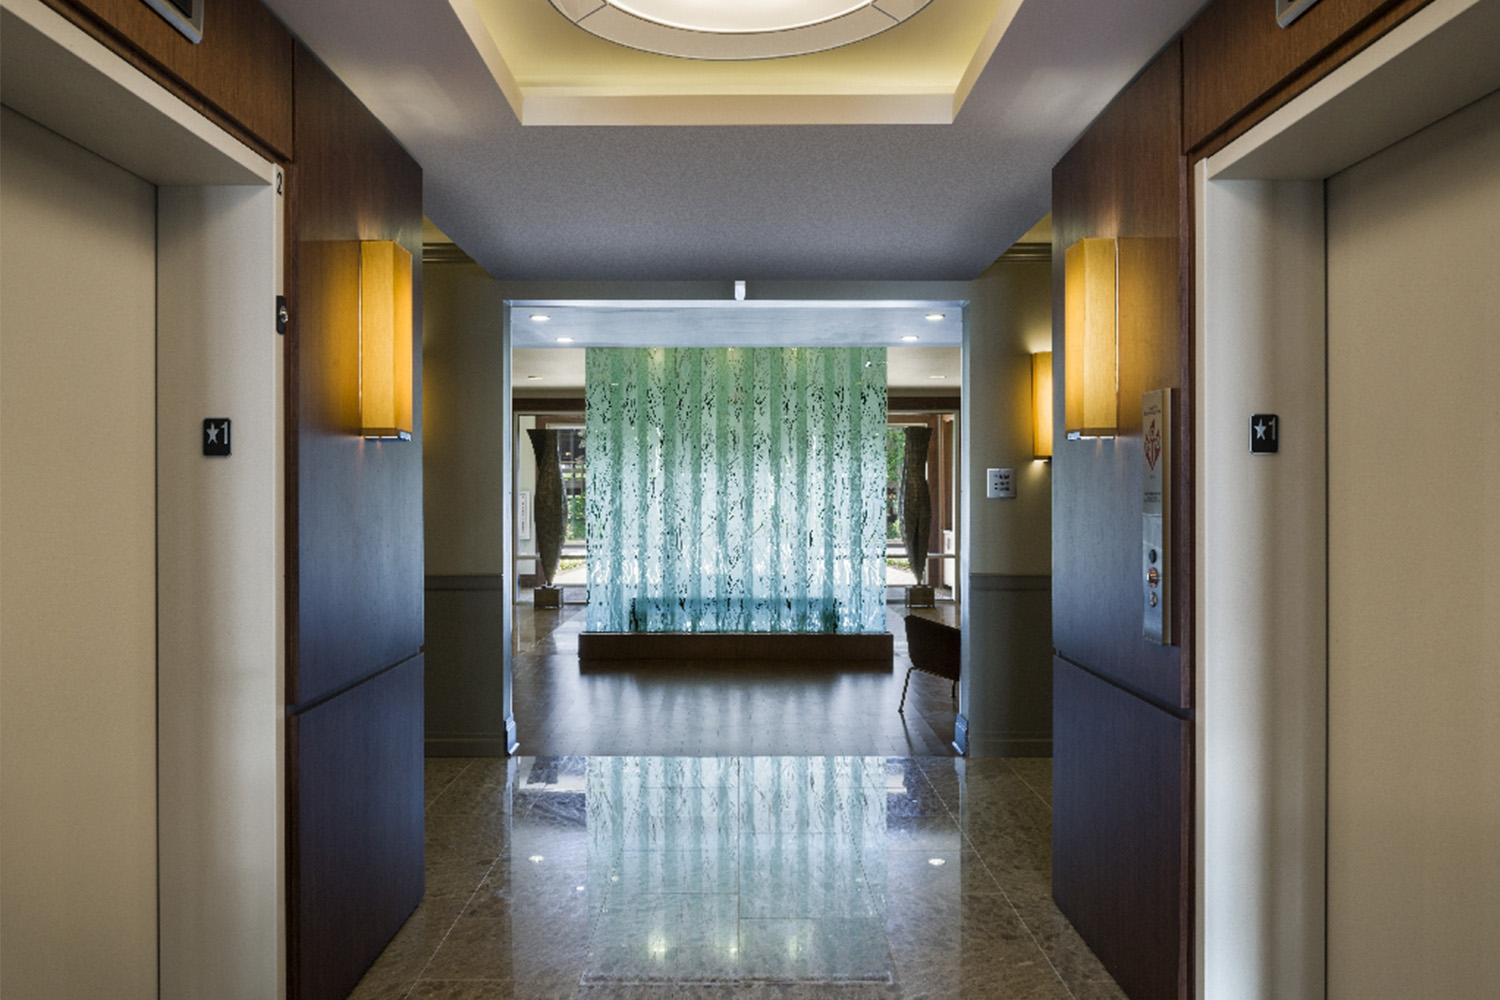 Hallway with an elevator on both sides, and modern light sconces 